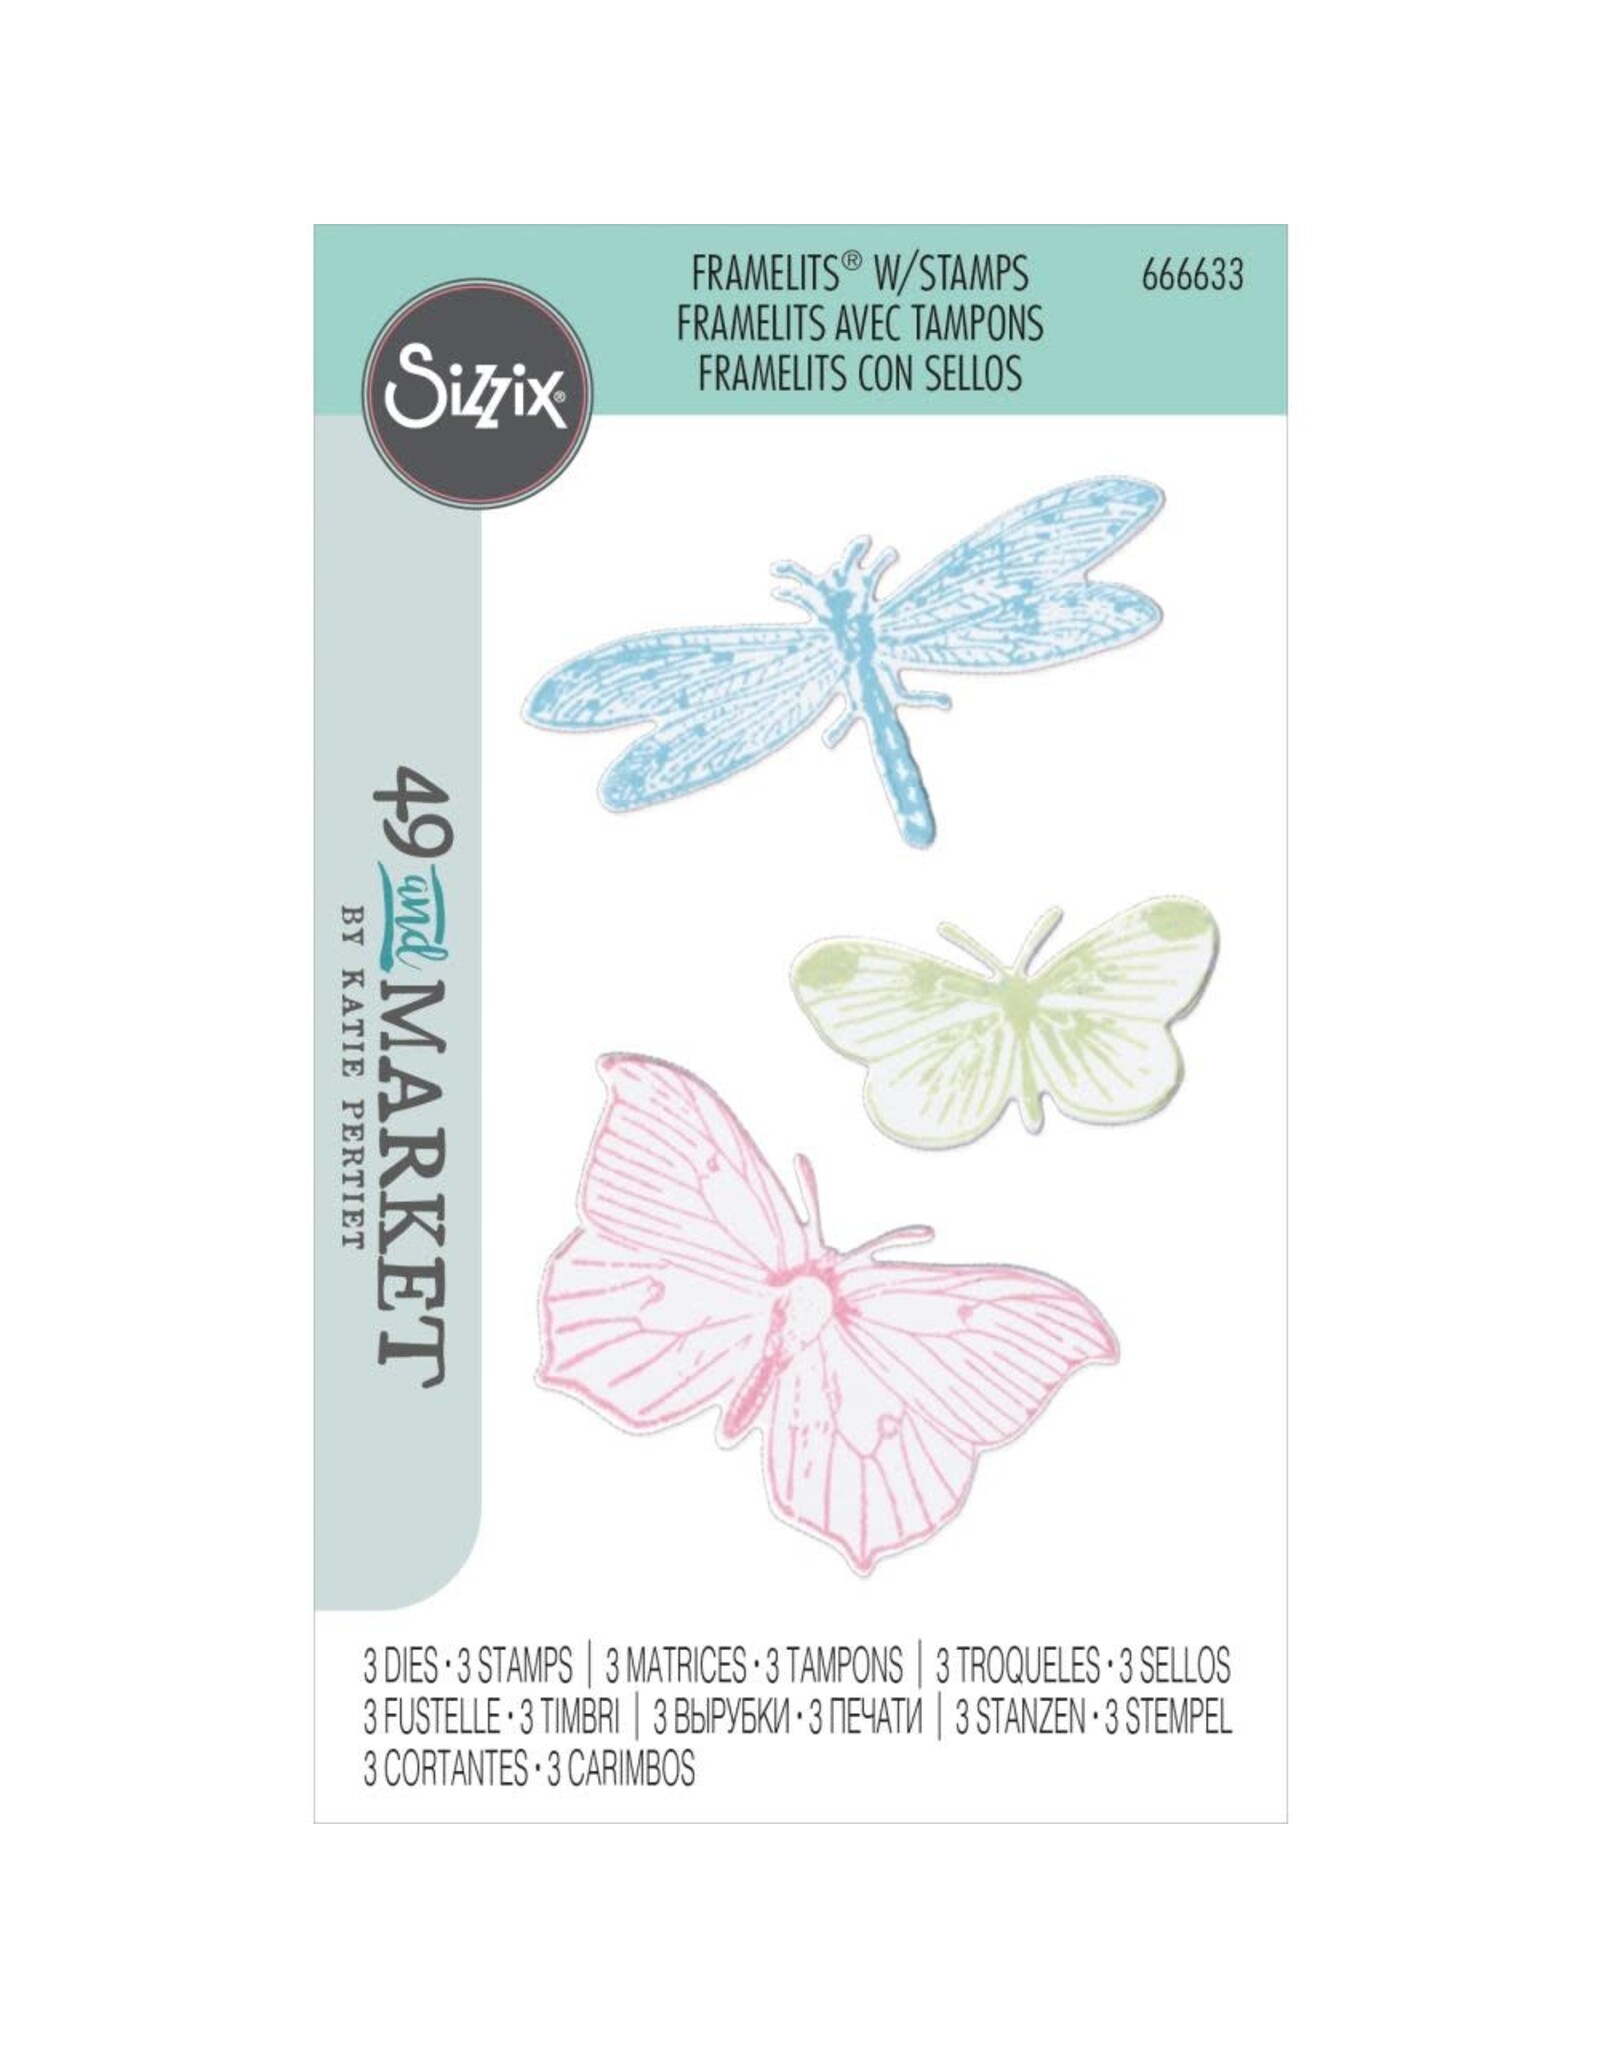 SIZZIX SIZZIX 49 AND MARKET ENGRAVED WINGS FRAMELITS DIE AND CLEAR STAMP SET